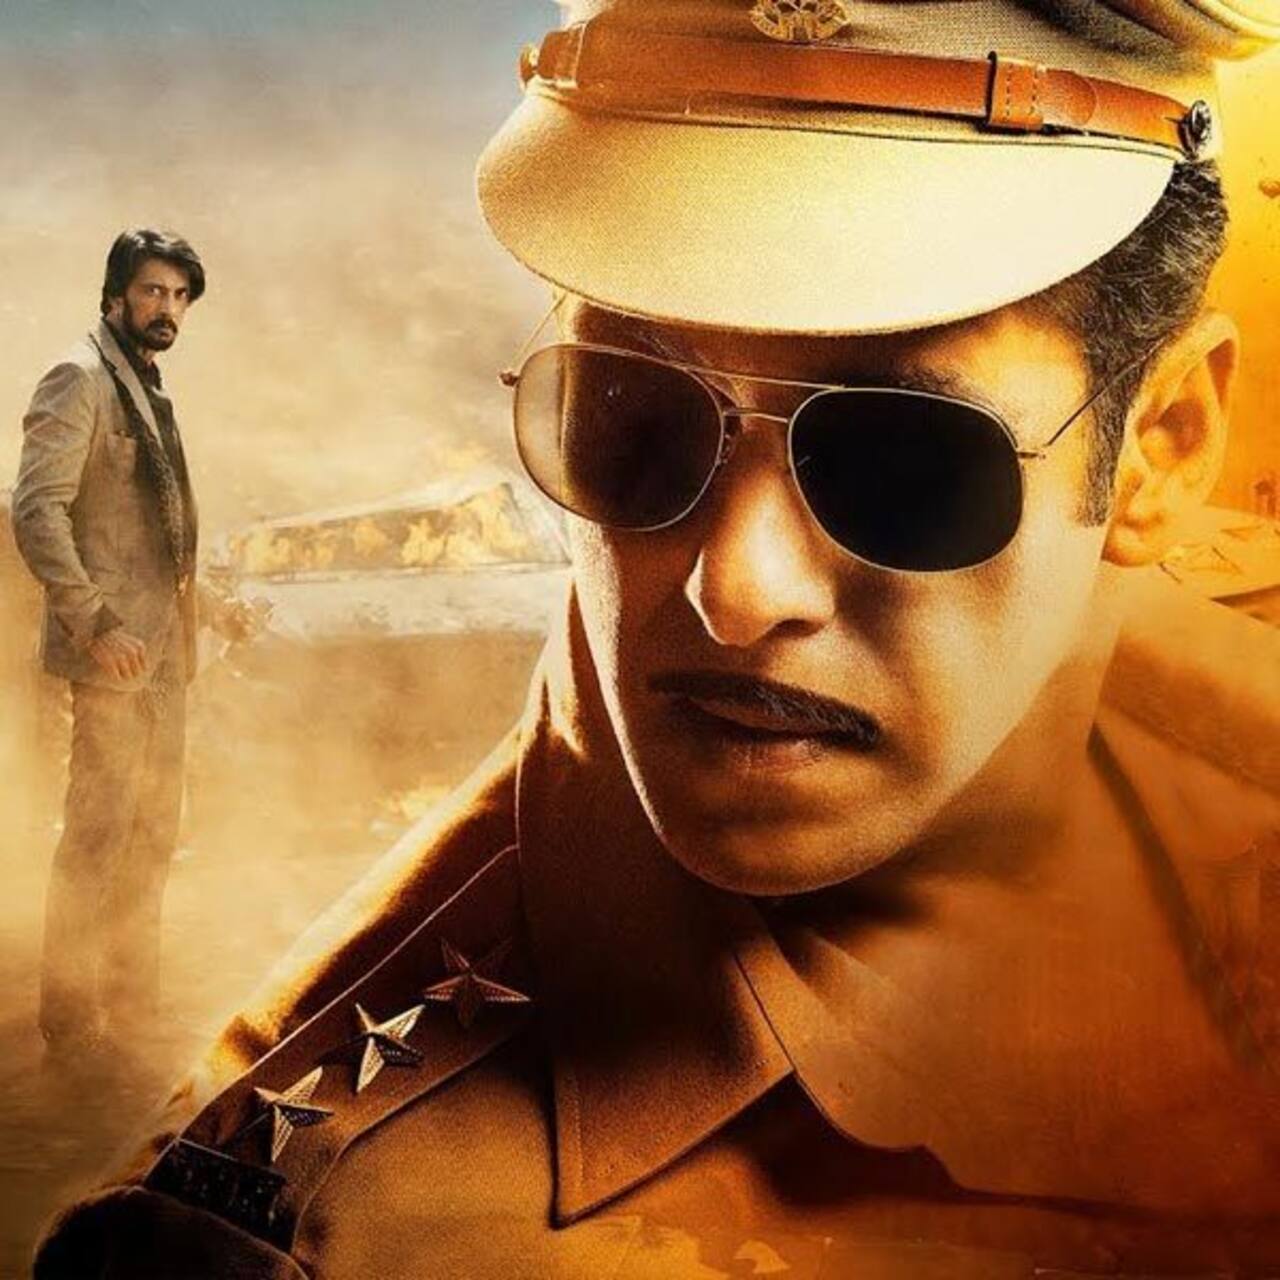 Dabangg 3 box office collection day 8 early estimates: Salman Khan starrer  witnesses a dip